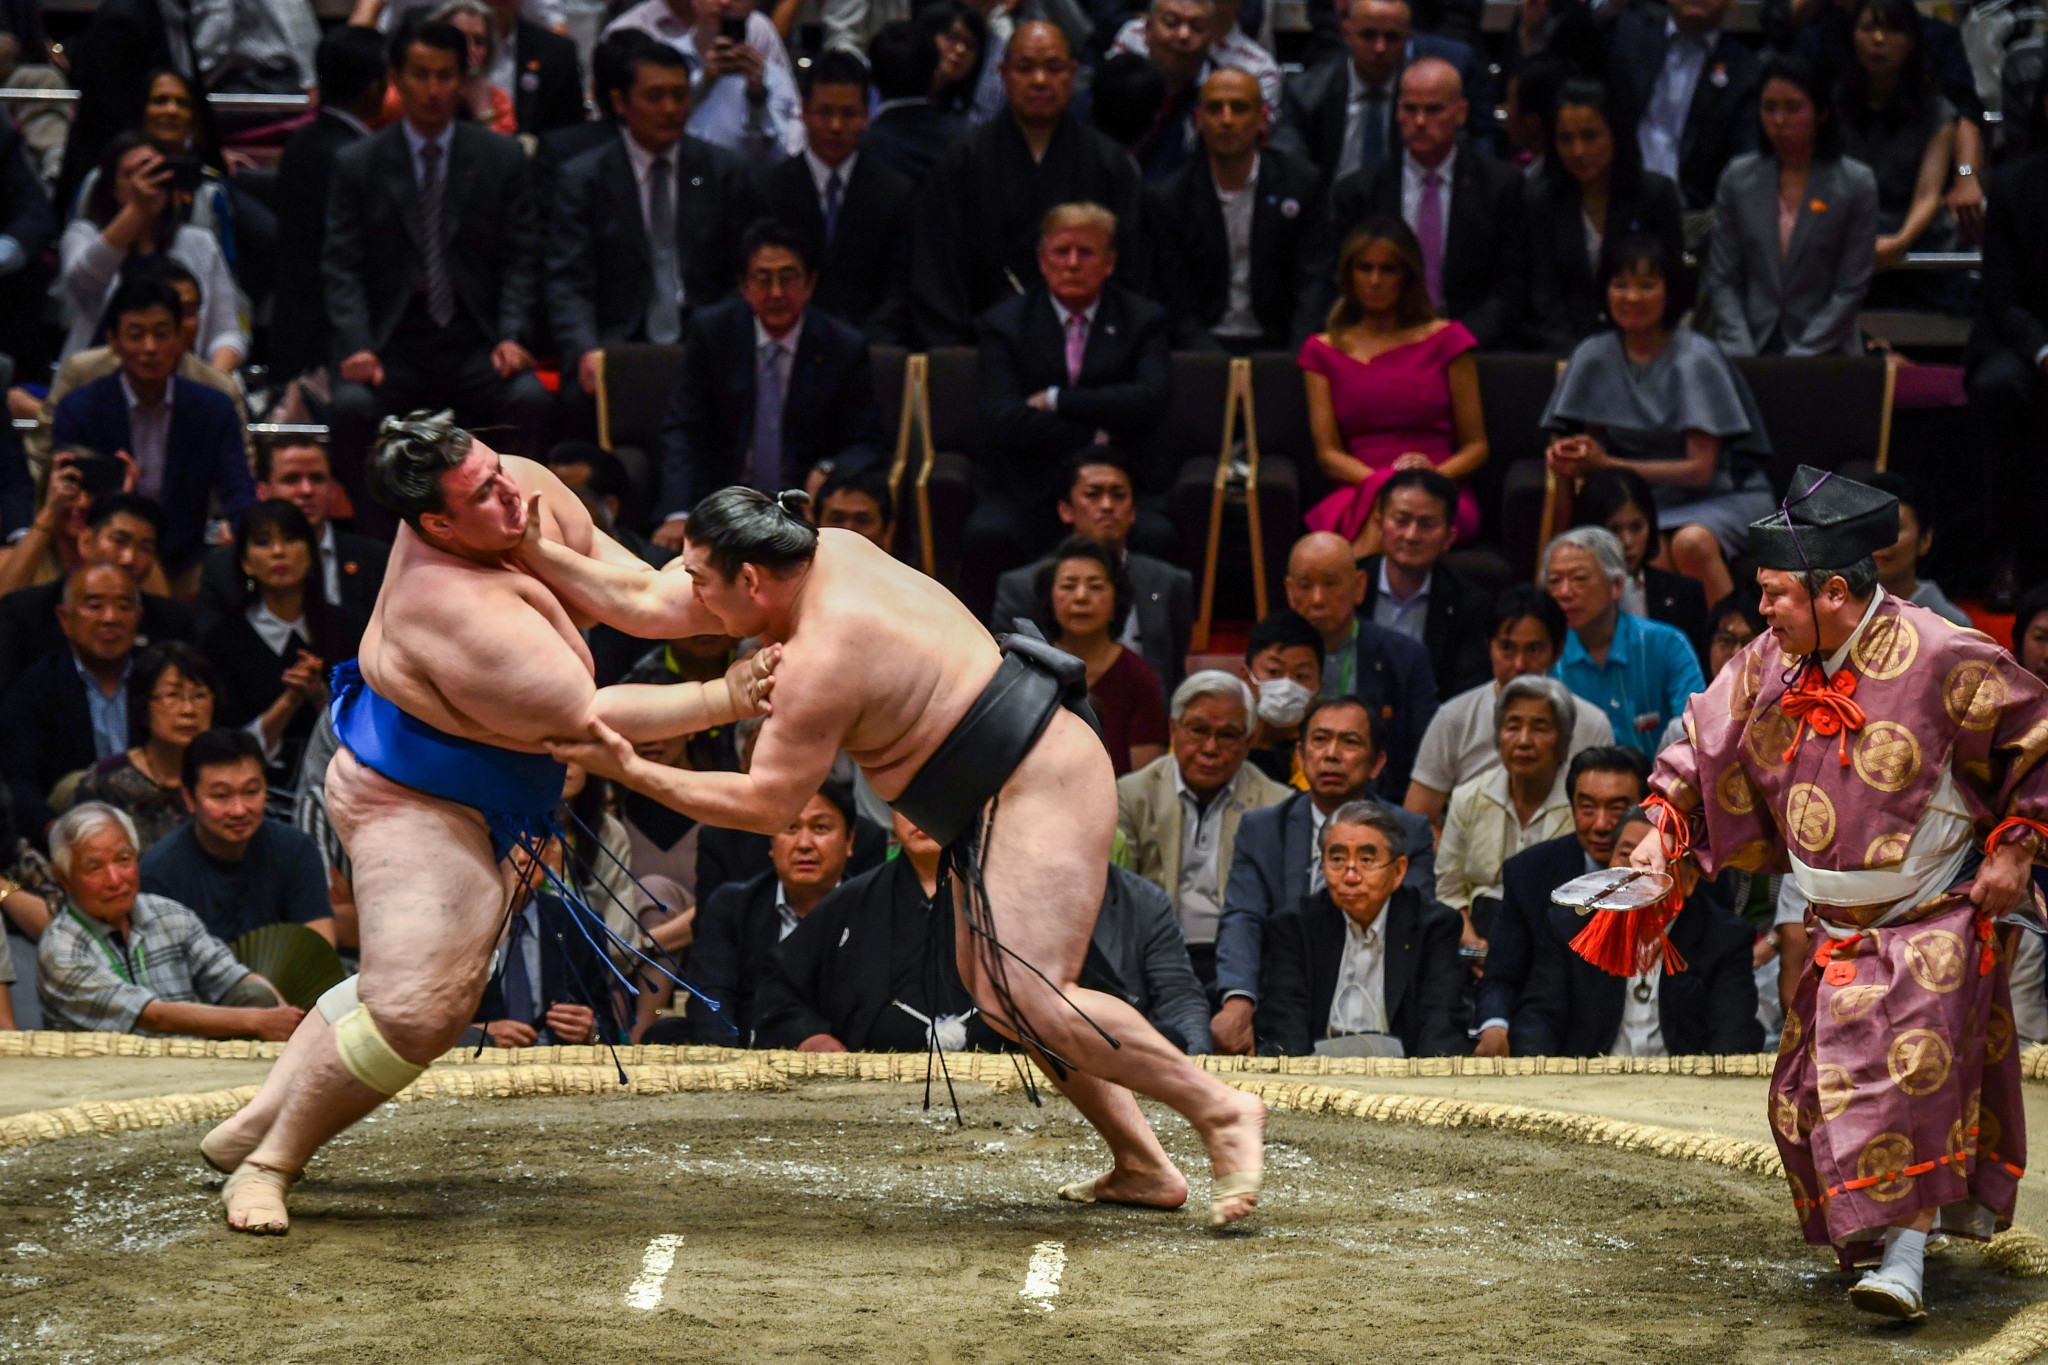 The Grand Sumo tournament has been confirmed as an addition to the calendar ©Getty Images